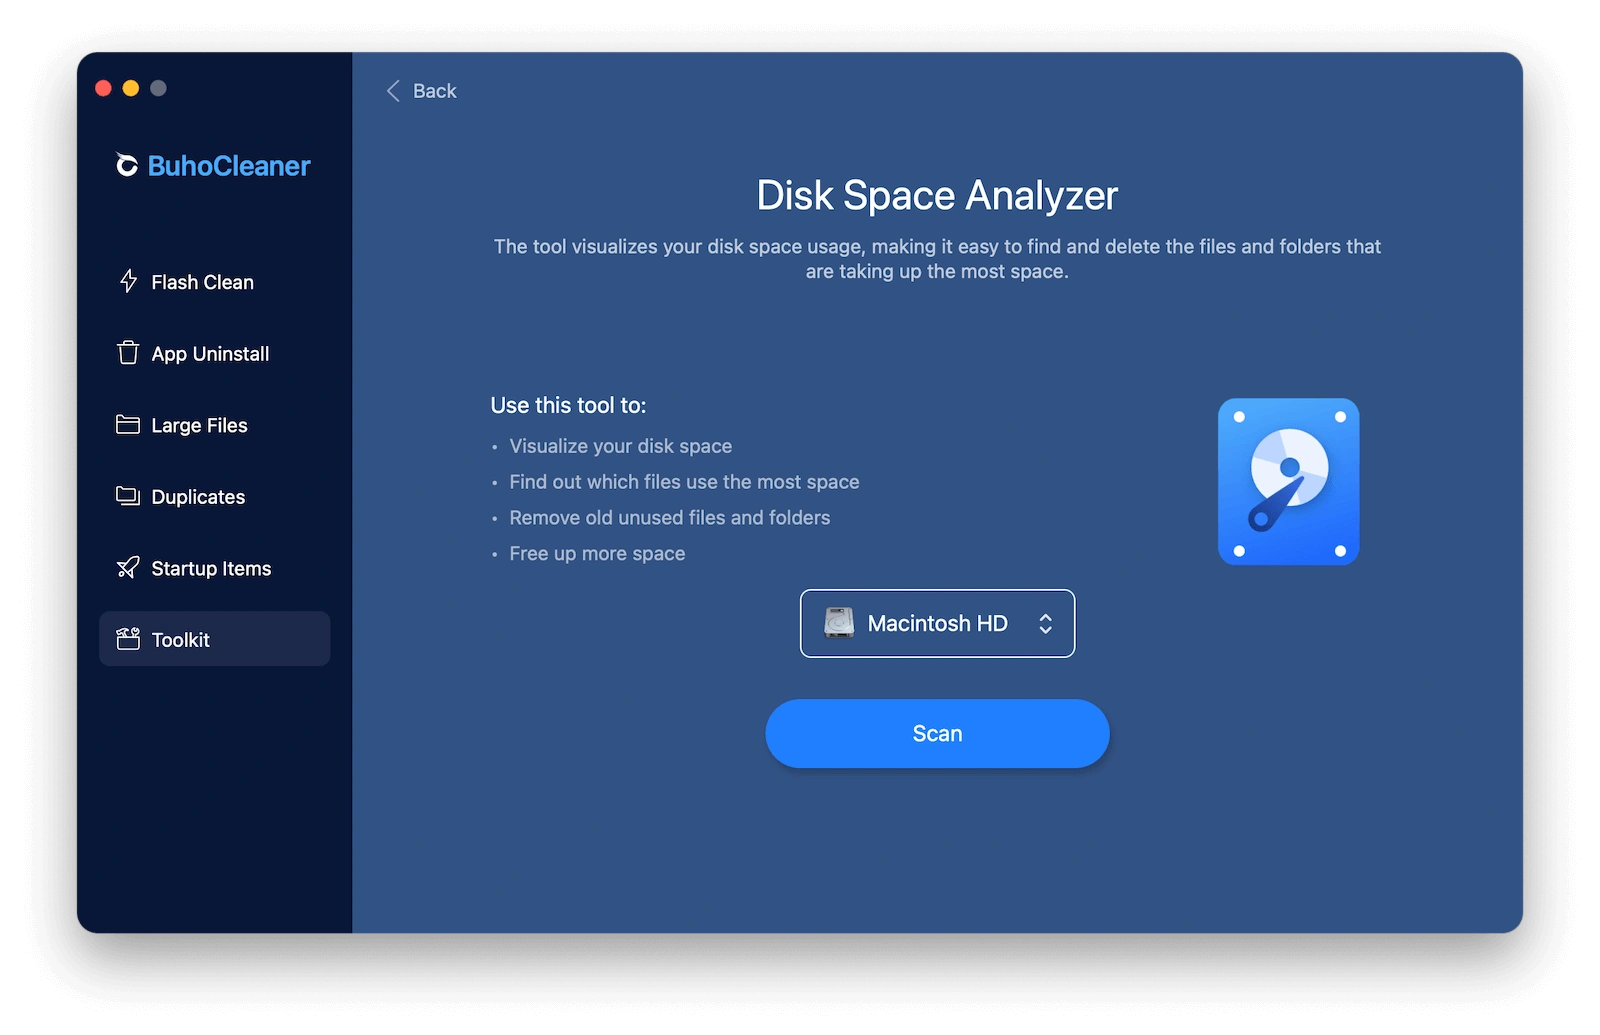 BuhoCleaner Disk Space Analyzer